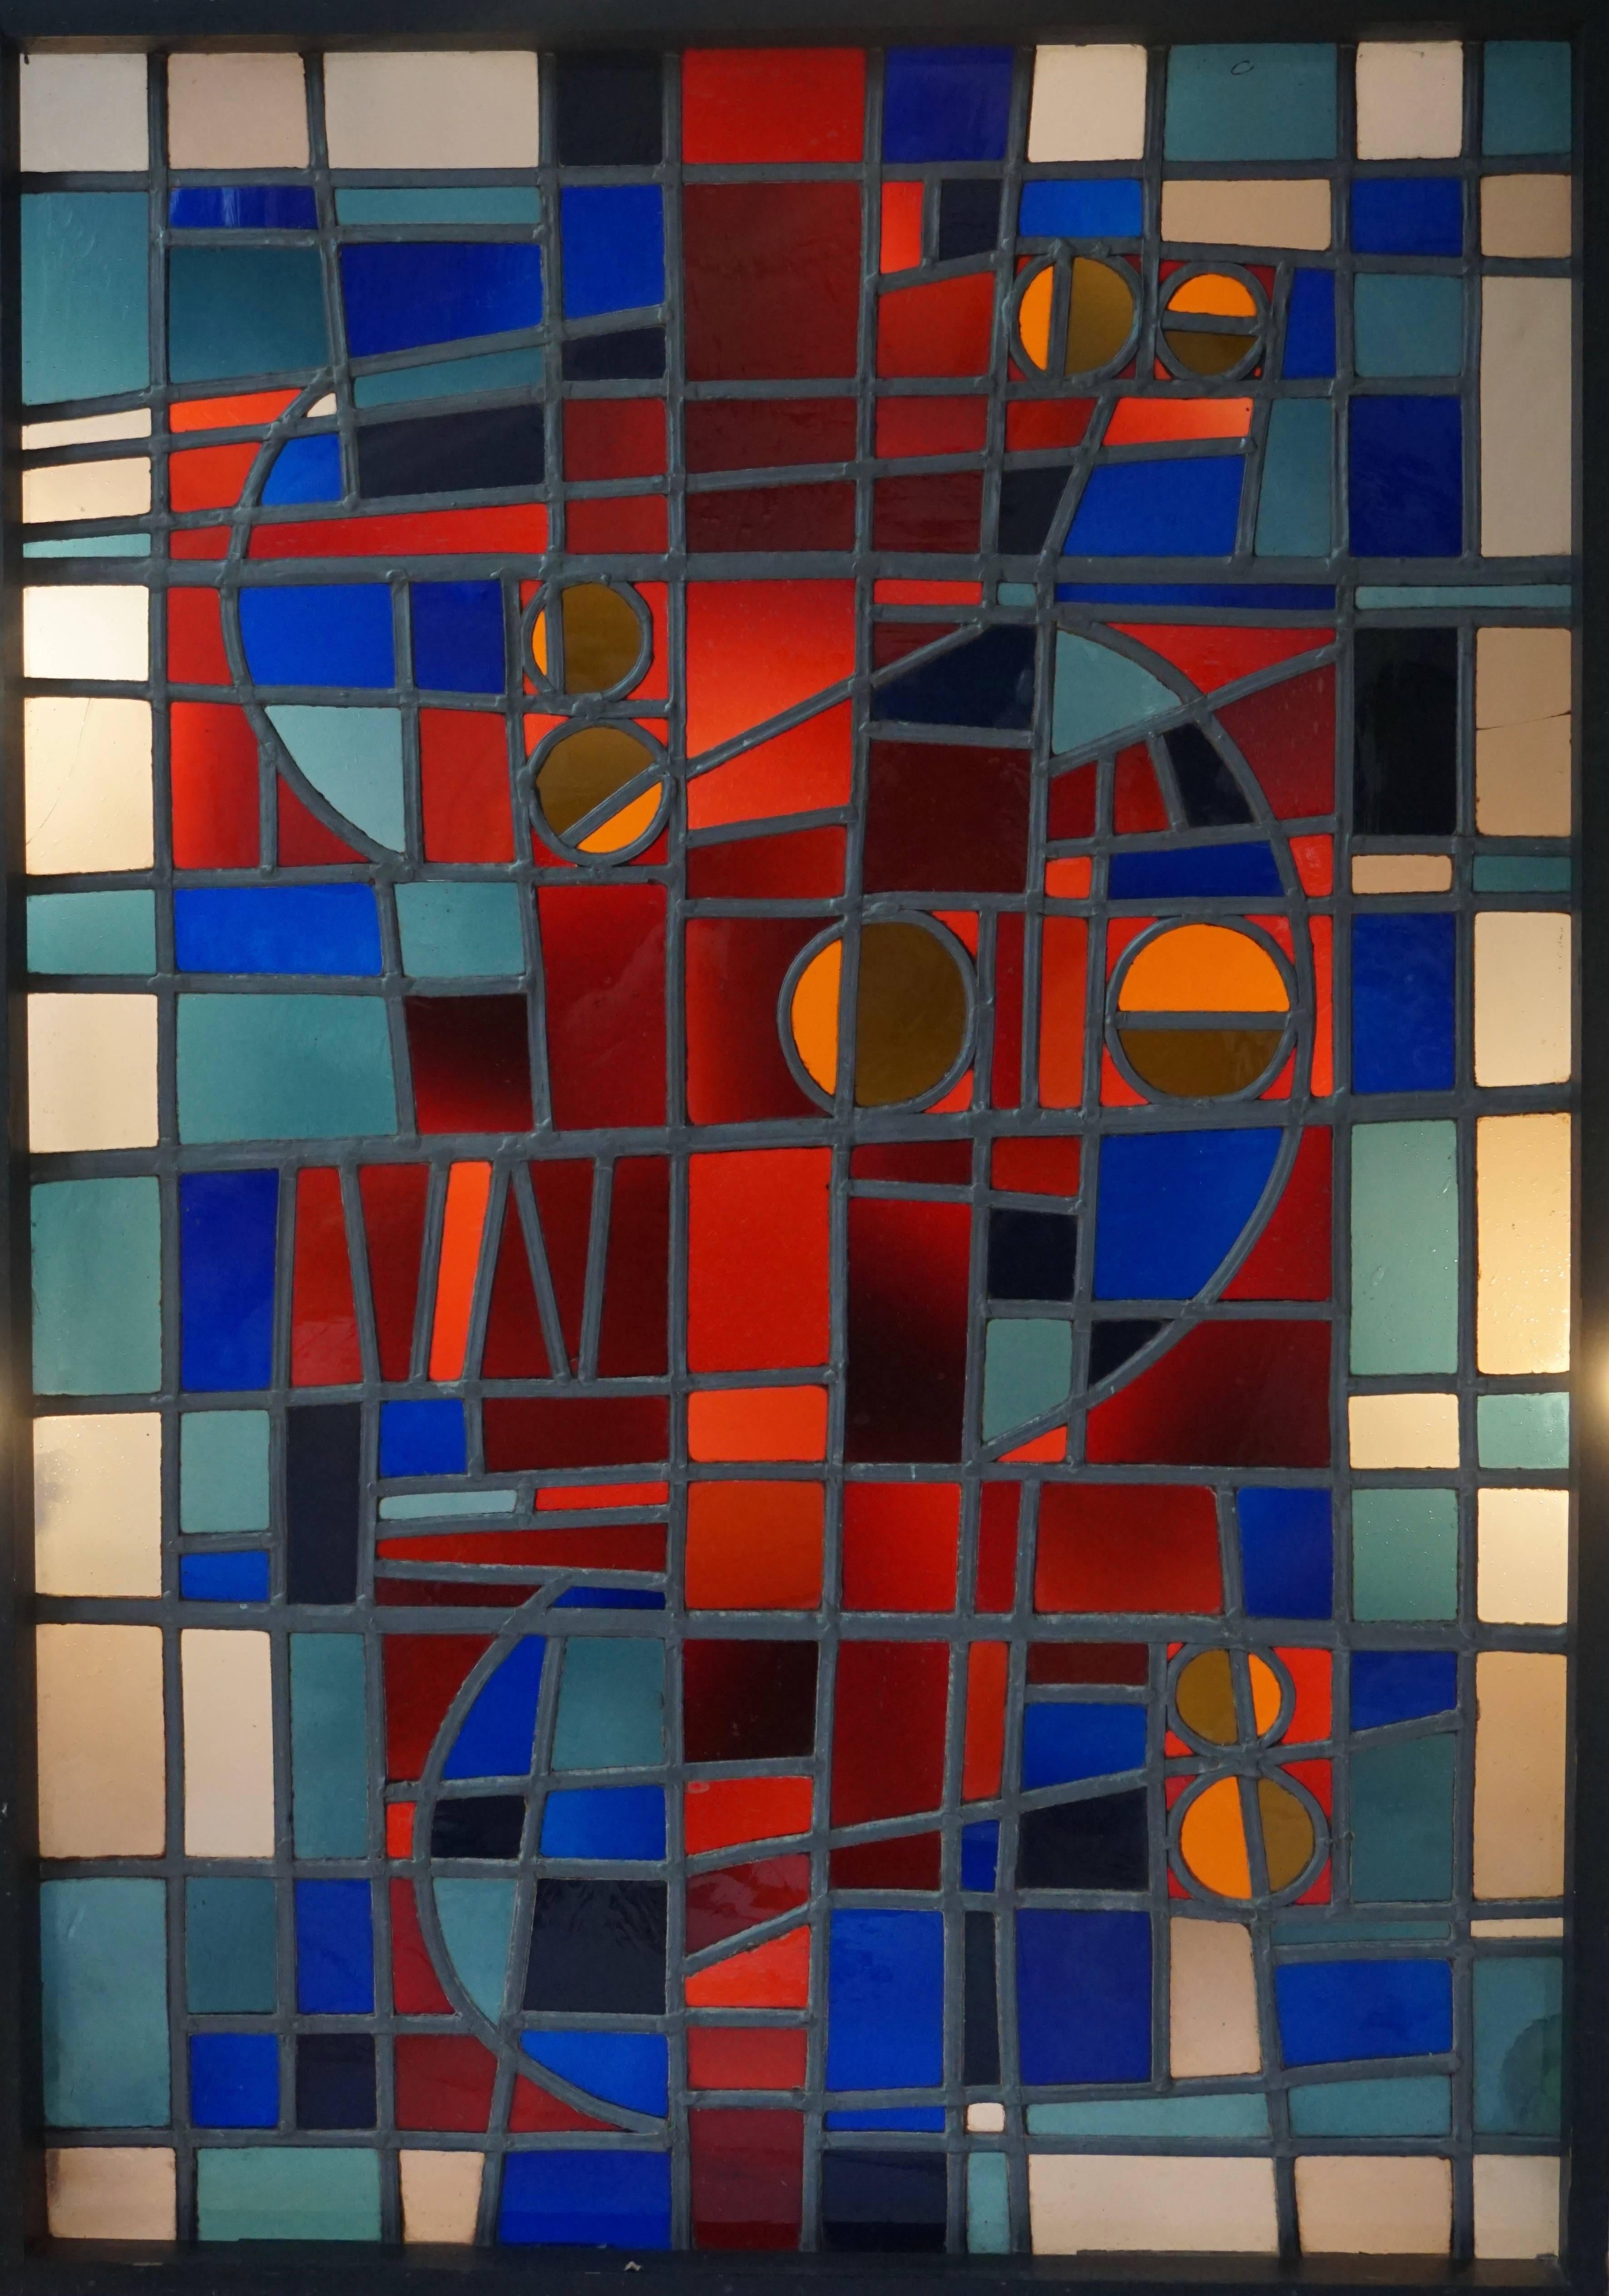 Beautiful stained glass window.

The weight is 9kg.
The dimensions of the frame are:height 102 cm - (40.16 inch)  - width 72 cm - ( 28.35 inch) - depth 6 cm.
The dimensions of the glass are:height 100 cm (39.37 inch) - width 70 cm (27.55 inch)